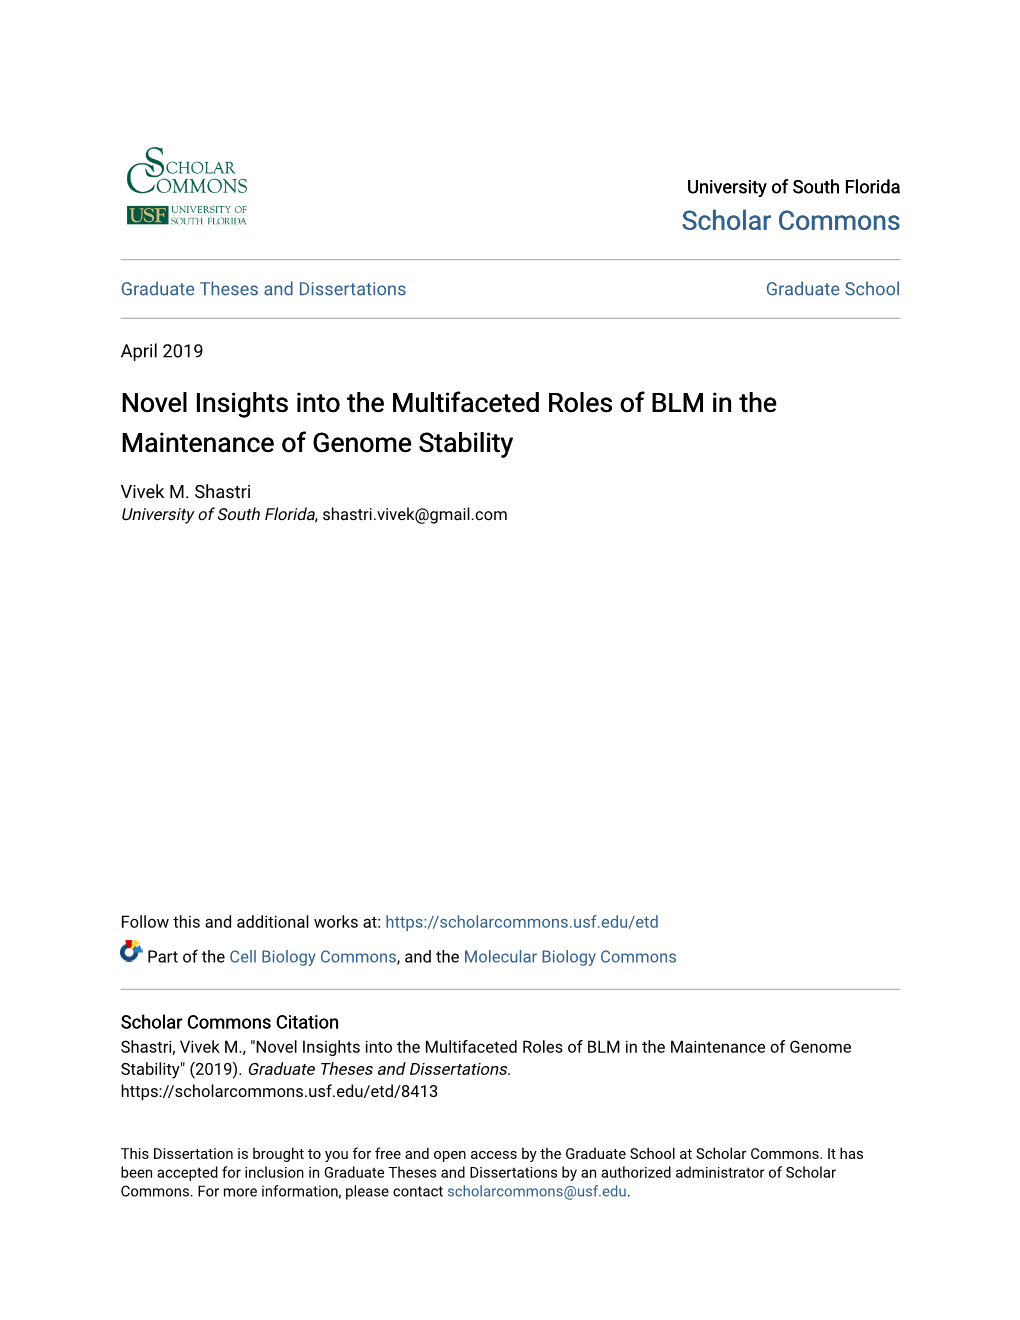 Novel Insights Into the Multifaceted Roles of BLM in the Maintenance of Genome Stability